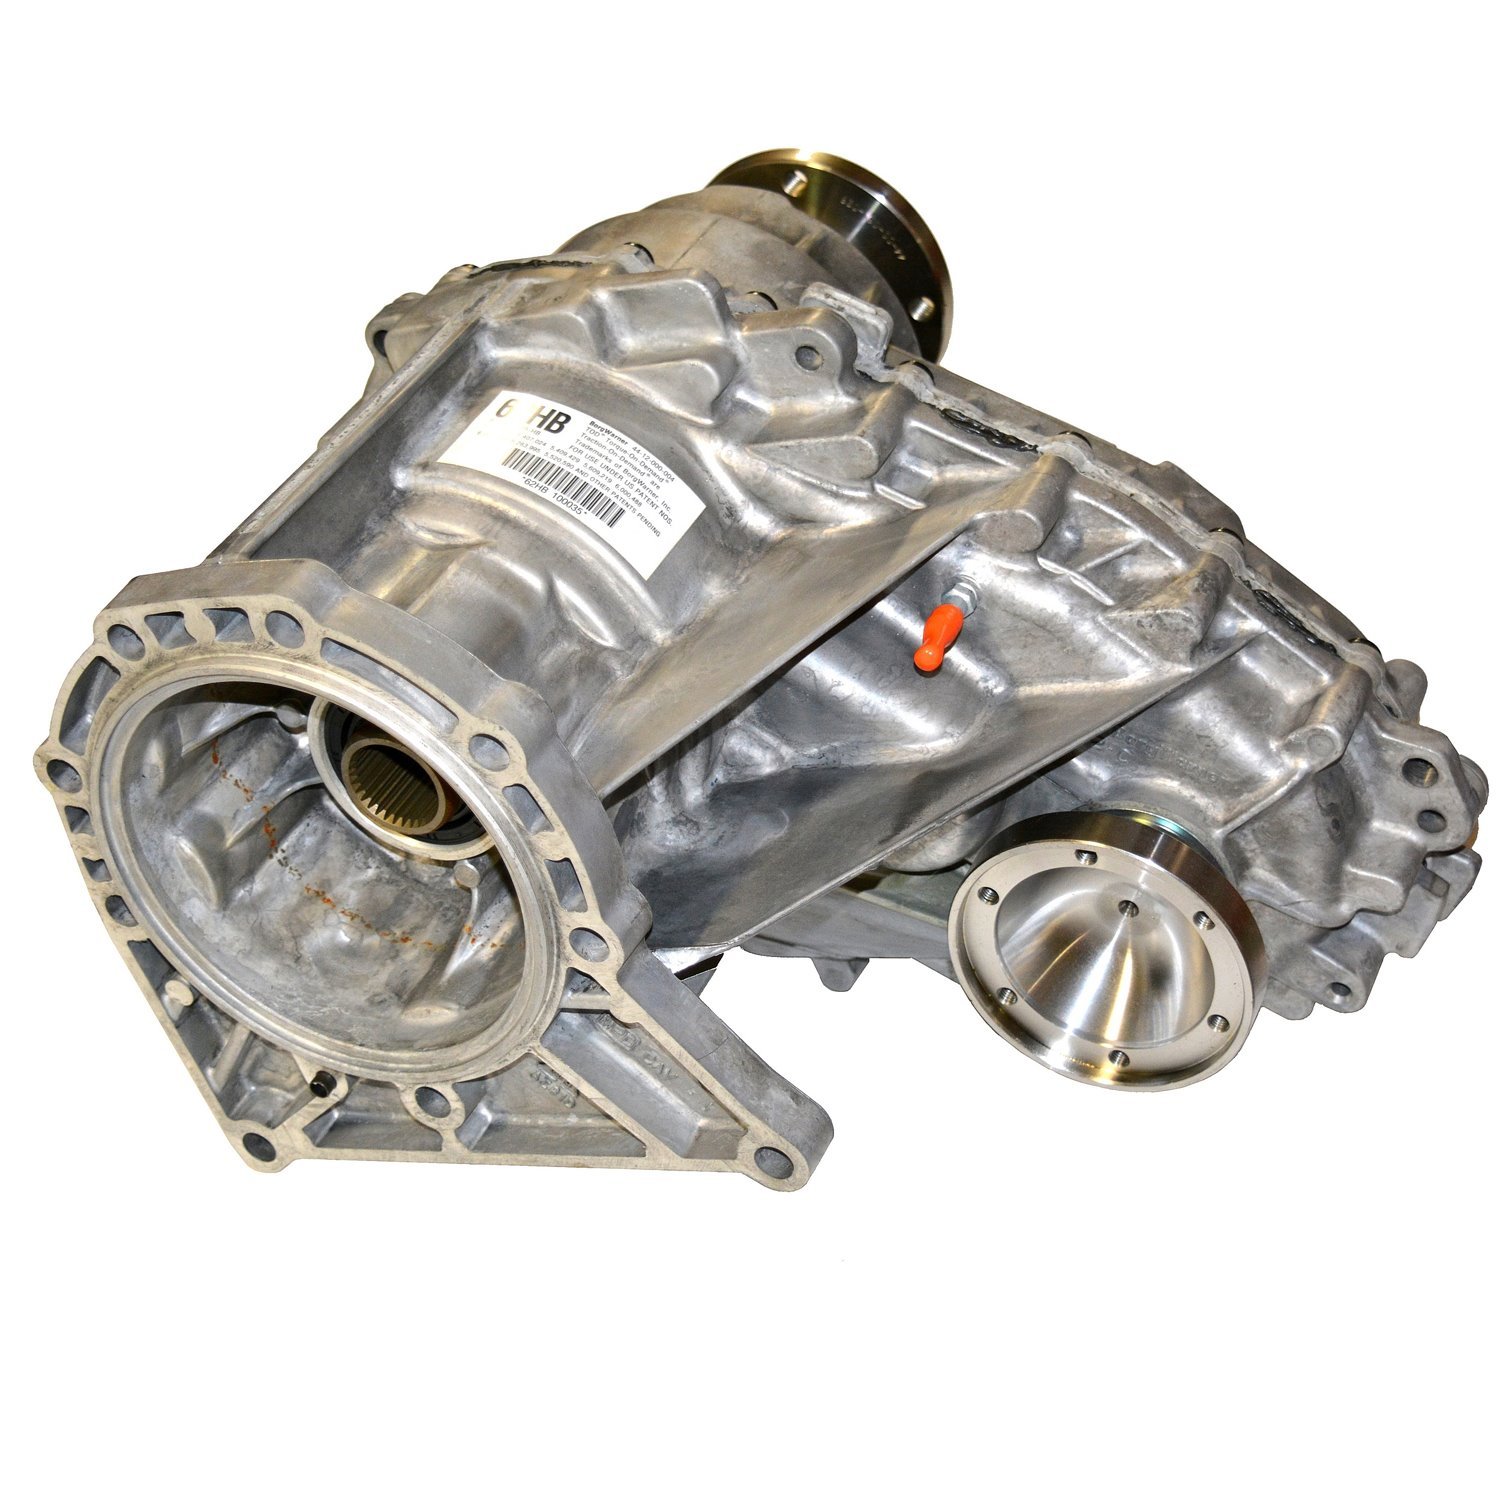 Remanufactured BW4412 Transfer Case for Ford 06-10 Explorer & Mountaineer 4.6L w/ Shift Motor